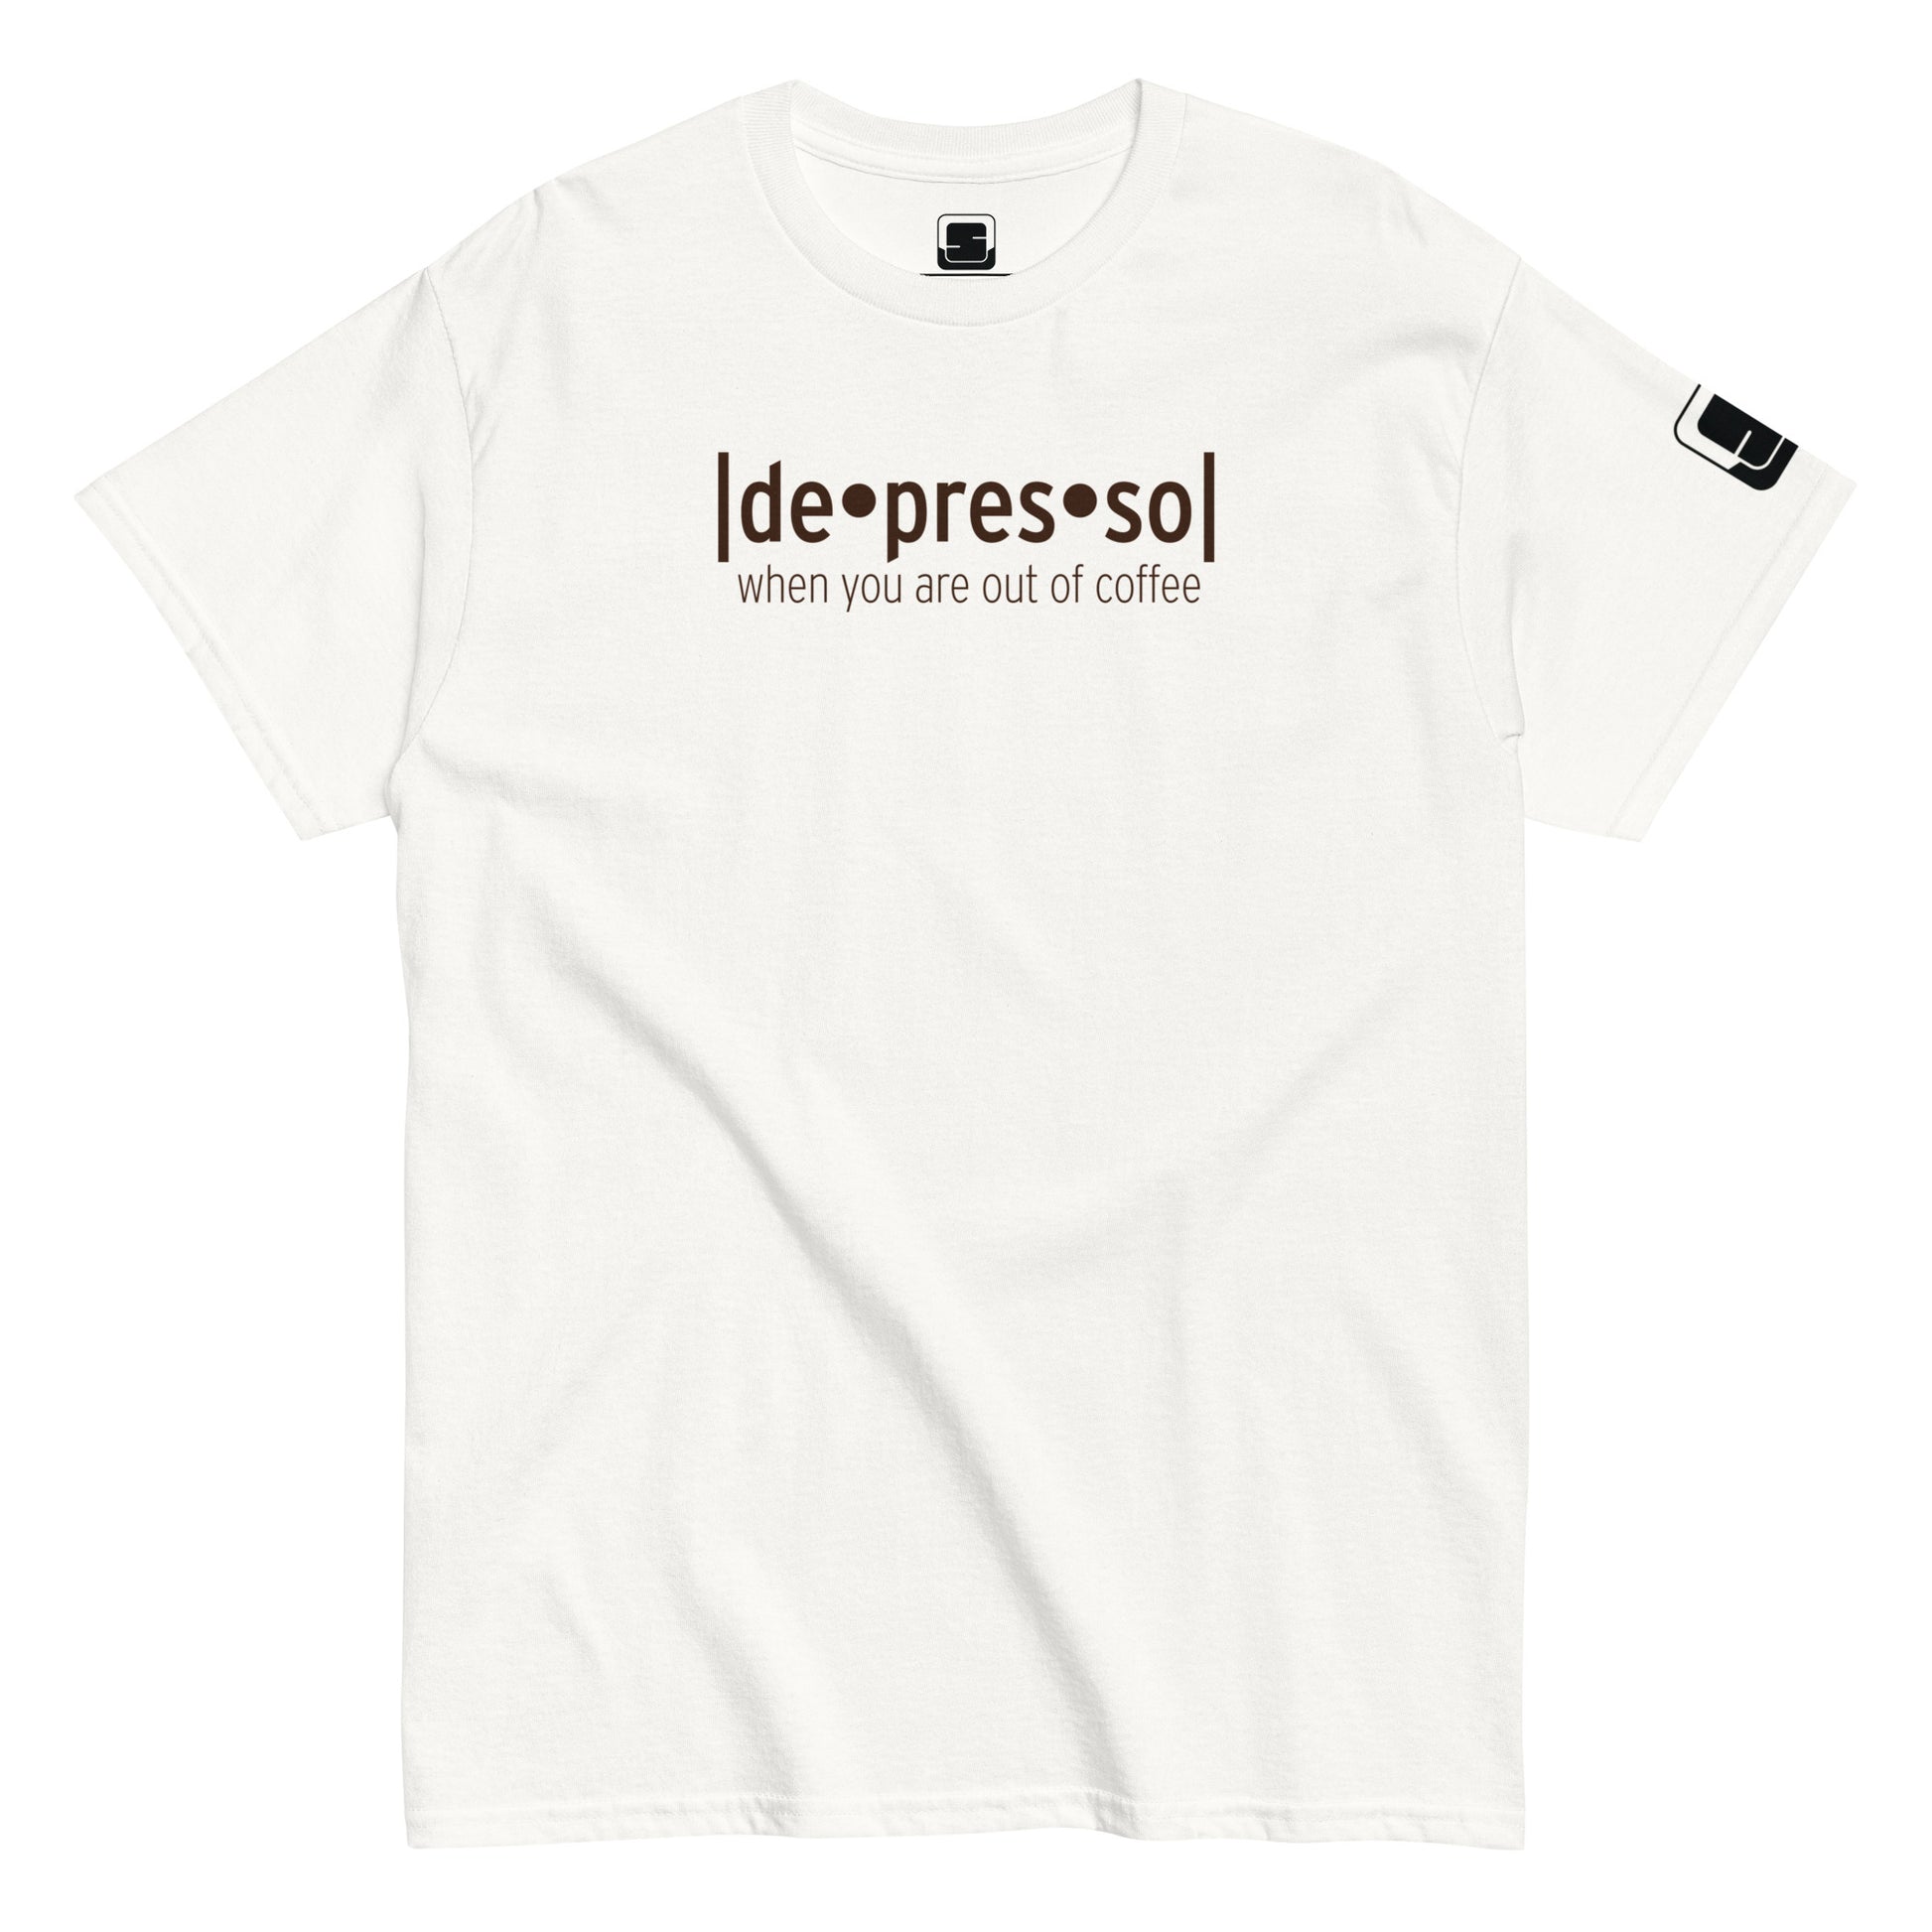 White t-shirt with the humorous phrase '[de]presso' followed by 'when you are out of coffee' in dark lettering, featuring a small black logo patch on the sleeve, displayed on a flat surface with a white background.